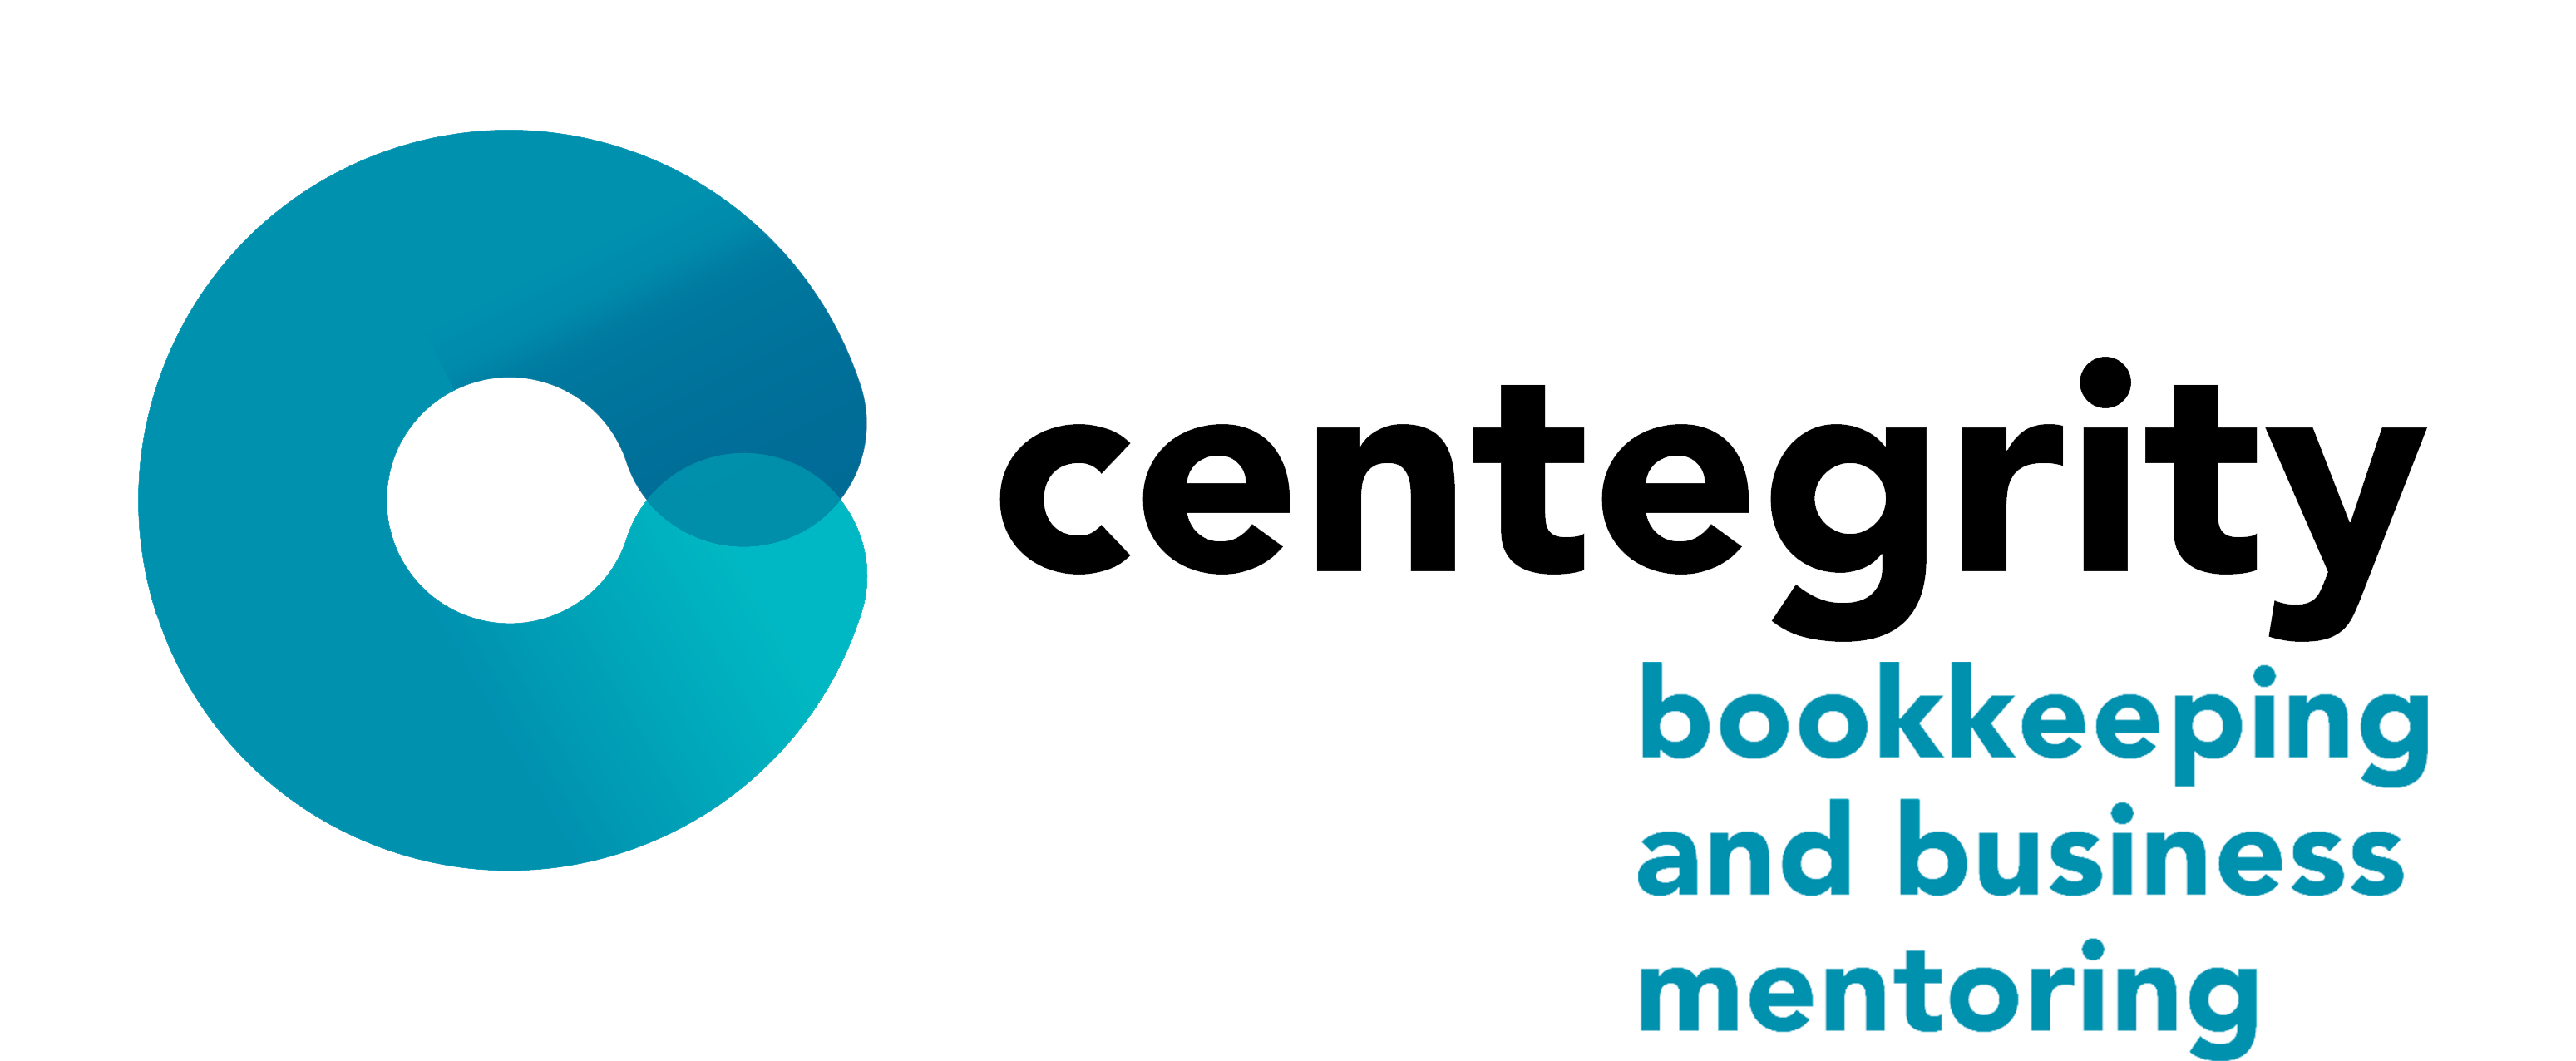 Centegrity: Bookkeeping & Business Mentoring | XERO Bookkeepers